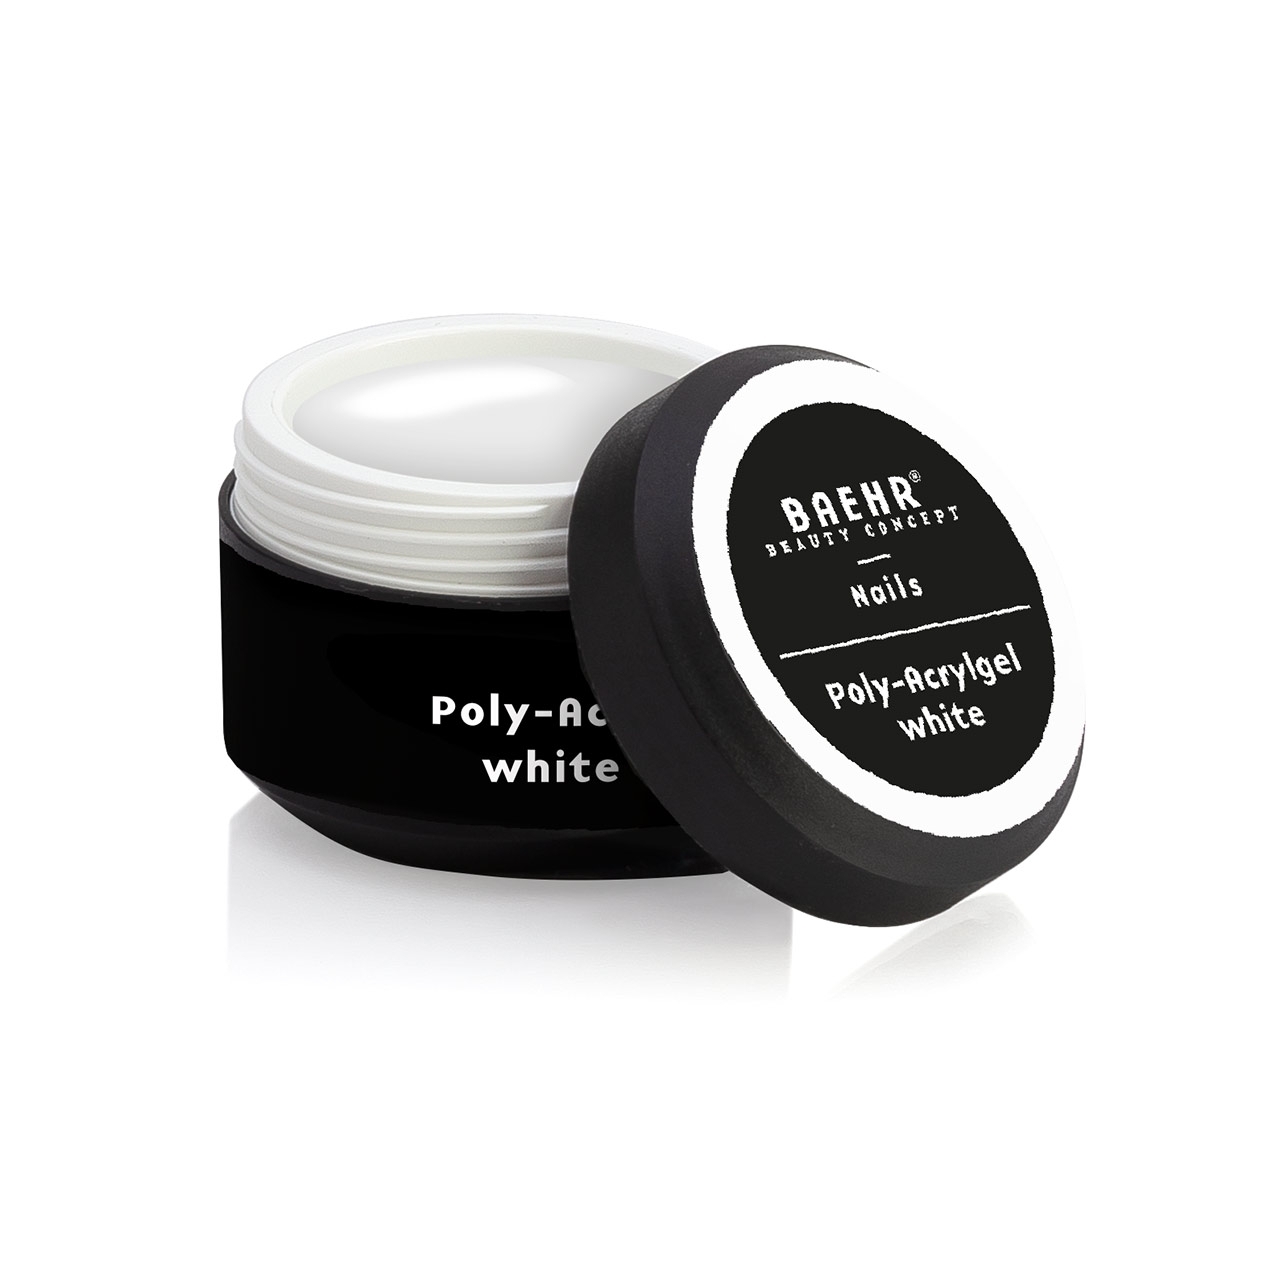 BAEHR BEAUTY CONCEPT - NAILS Poly-Acrylgel white 30 ml